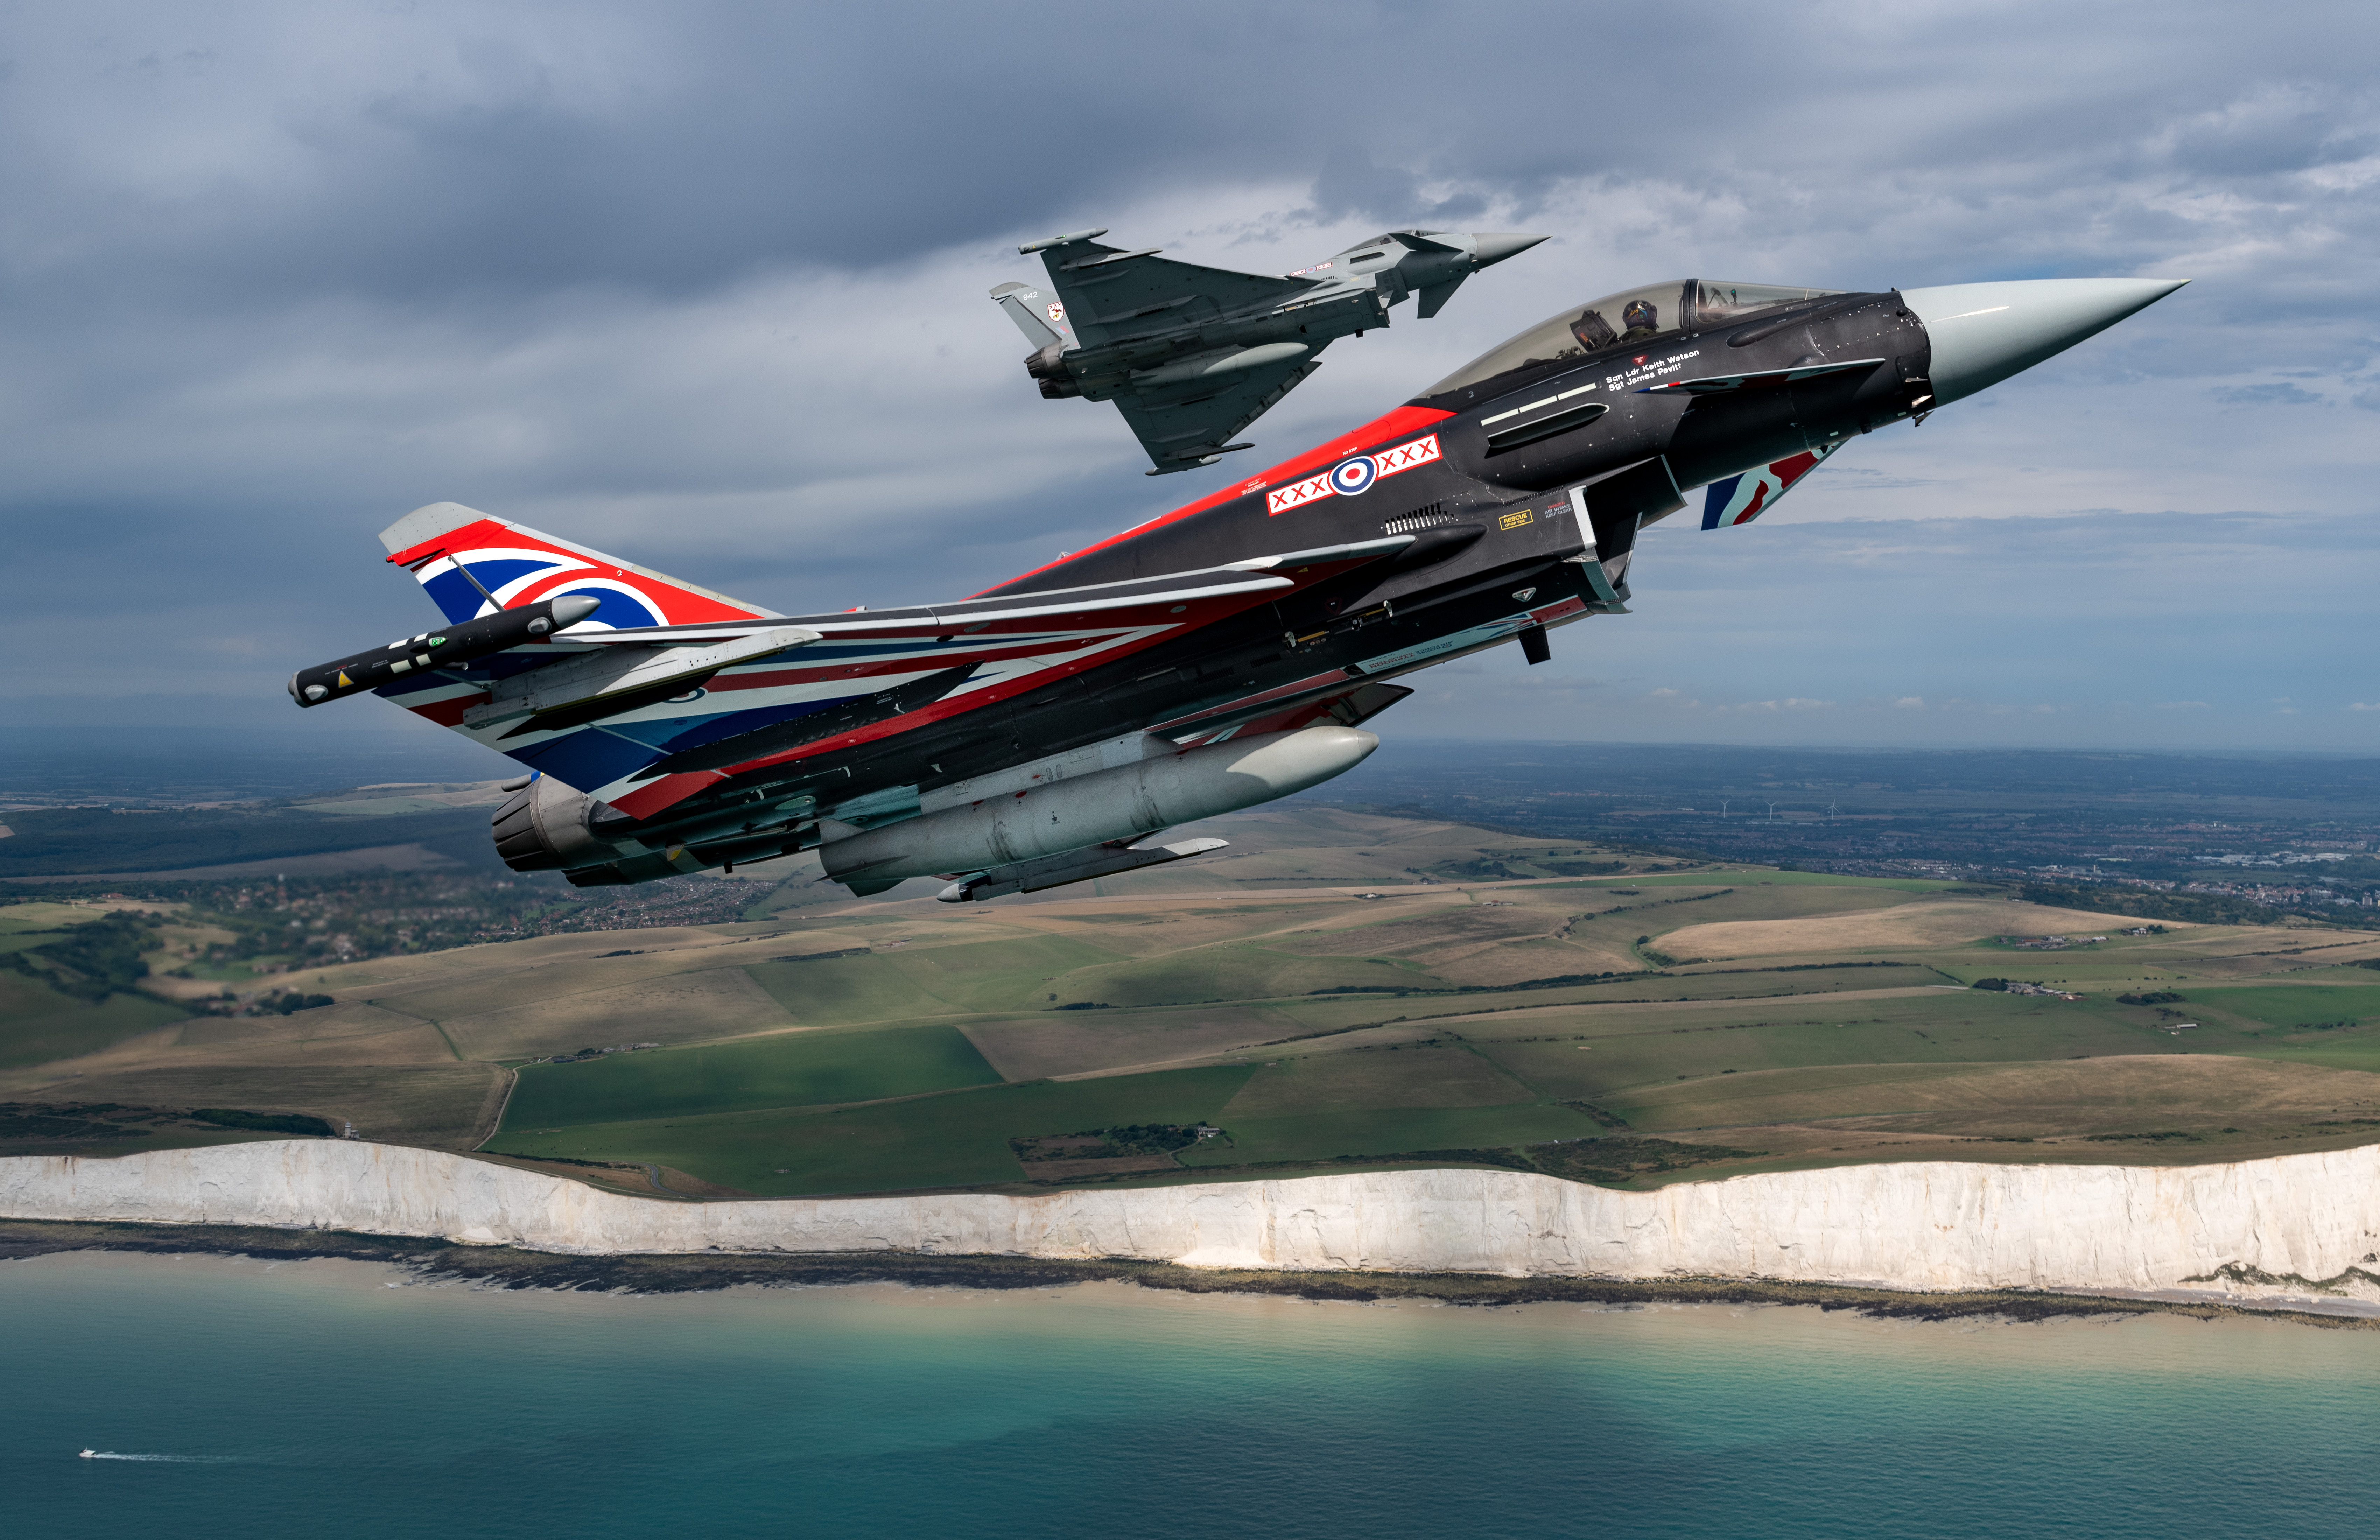 Image shows two Typhoons with Union Jack paint in flight over the white cliffs.